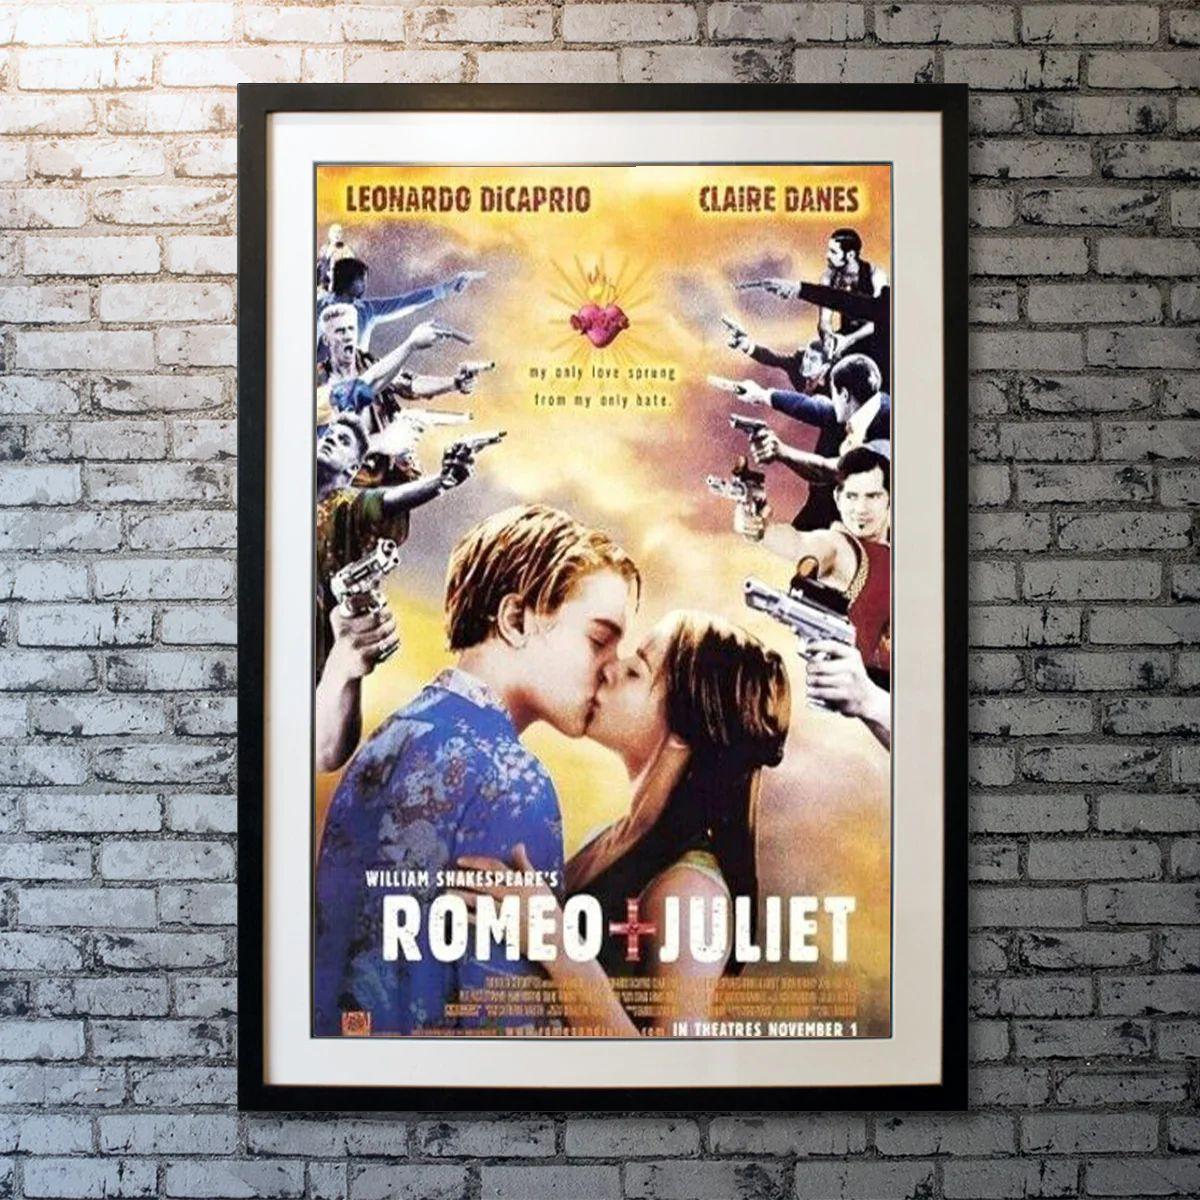 Romeo + Juliet, Unframed Poster, 1996

Original One Sheet (27 X 40 Inches). Shakespeare's famous play is updated to the hip modern suburb of Verona still retaining its original dialogue.

Year: 1996
Nationality: US
Condition: Unfolded
Type: Original